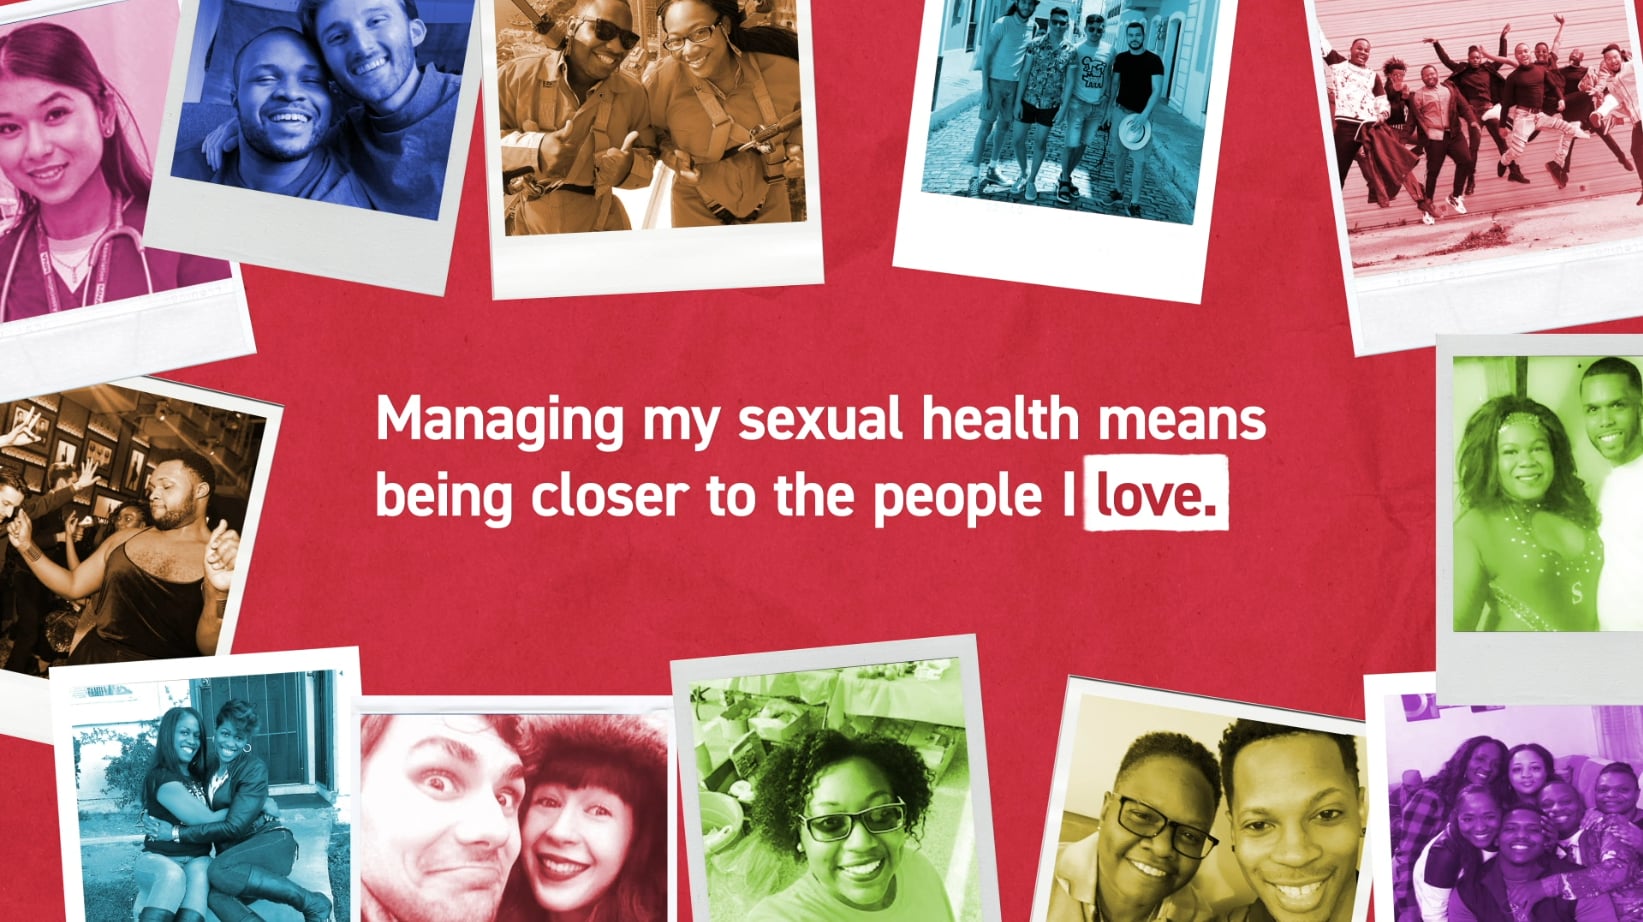 Take control of your #sexualhealth so you can focus on what matters to you! Learn more about your #HIV prevention options, like using #condoms or taking #PrEP, and decide what works best for YOU: cdc.gov/HIVPrevention